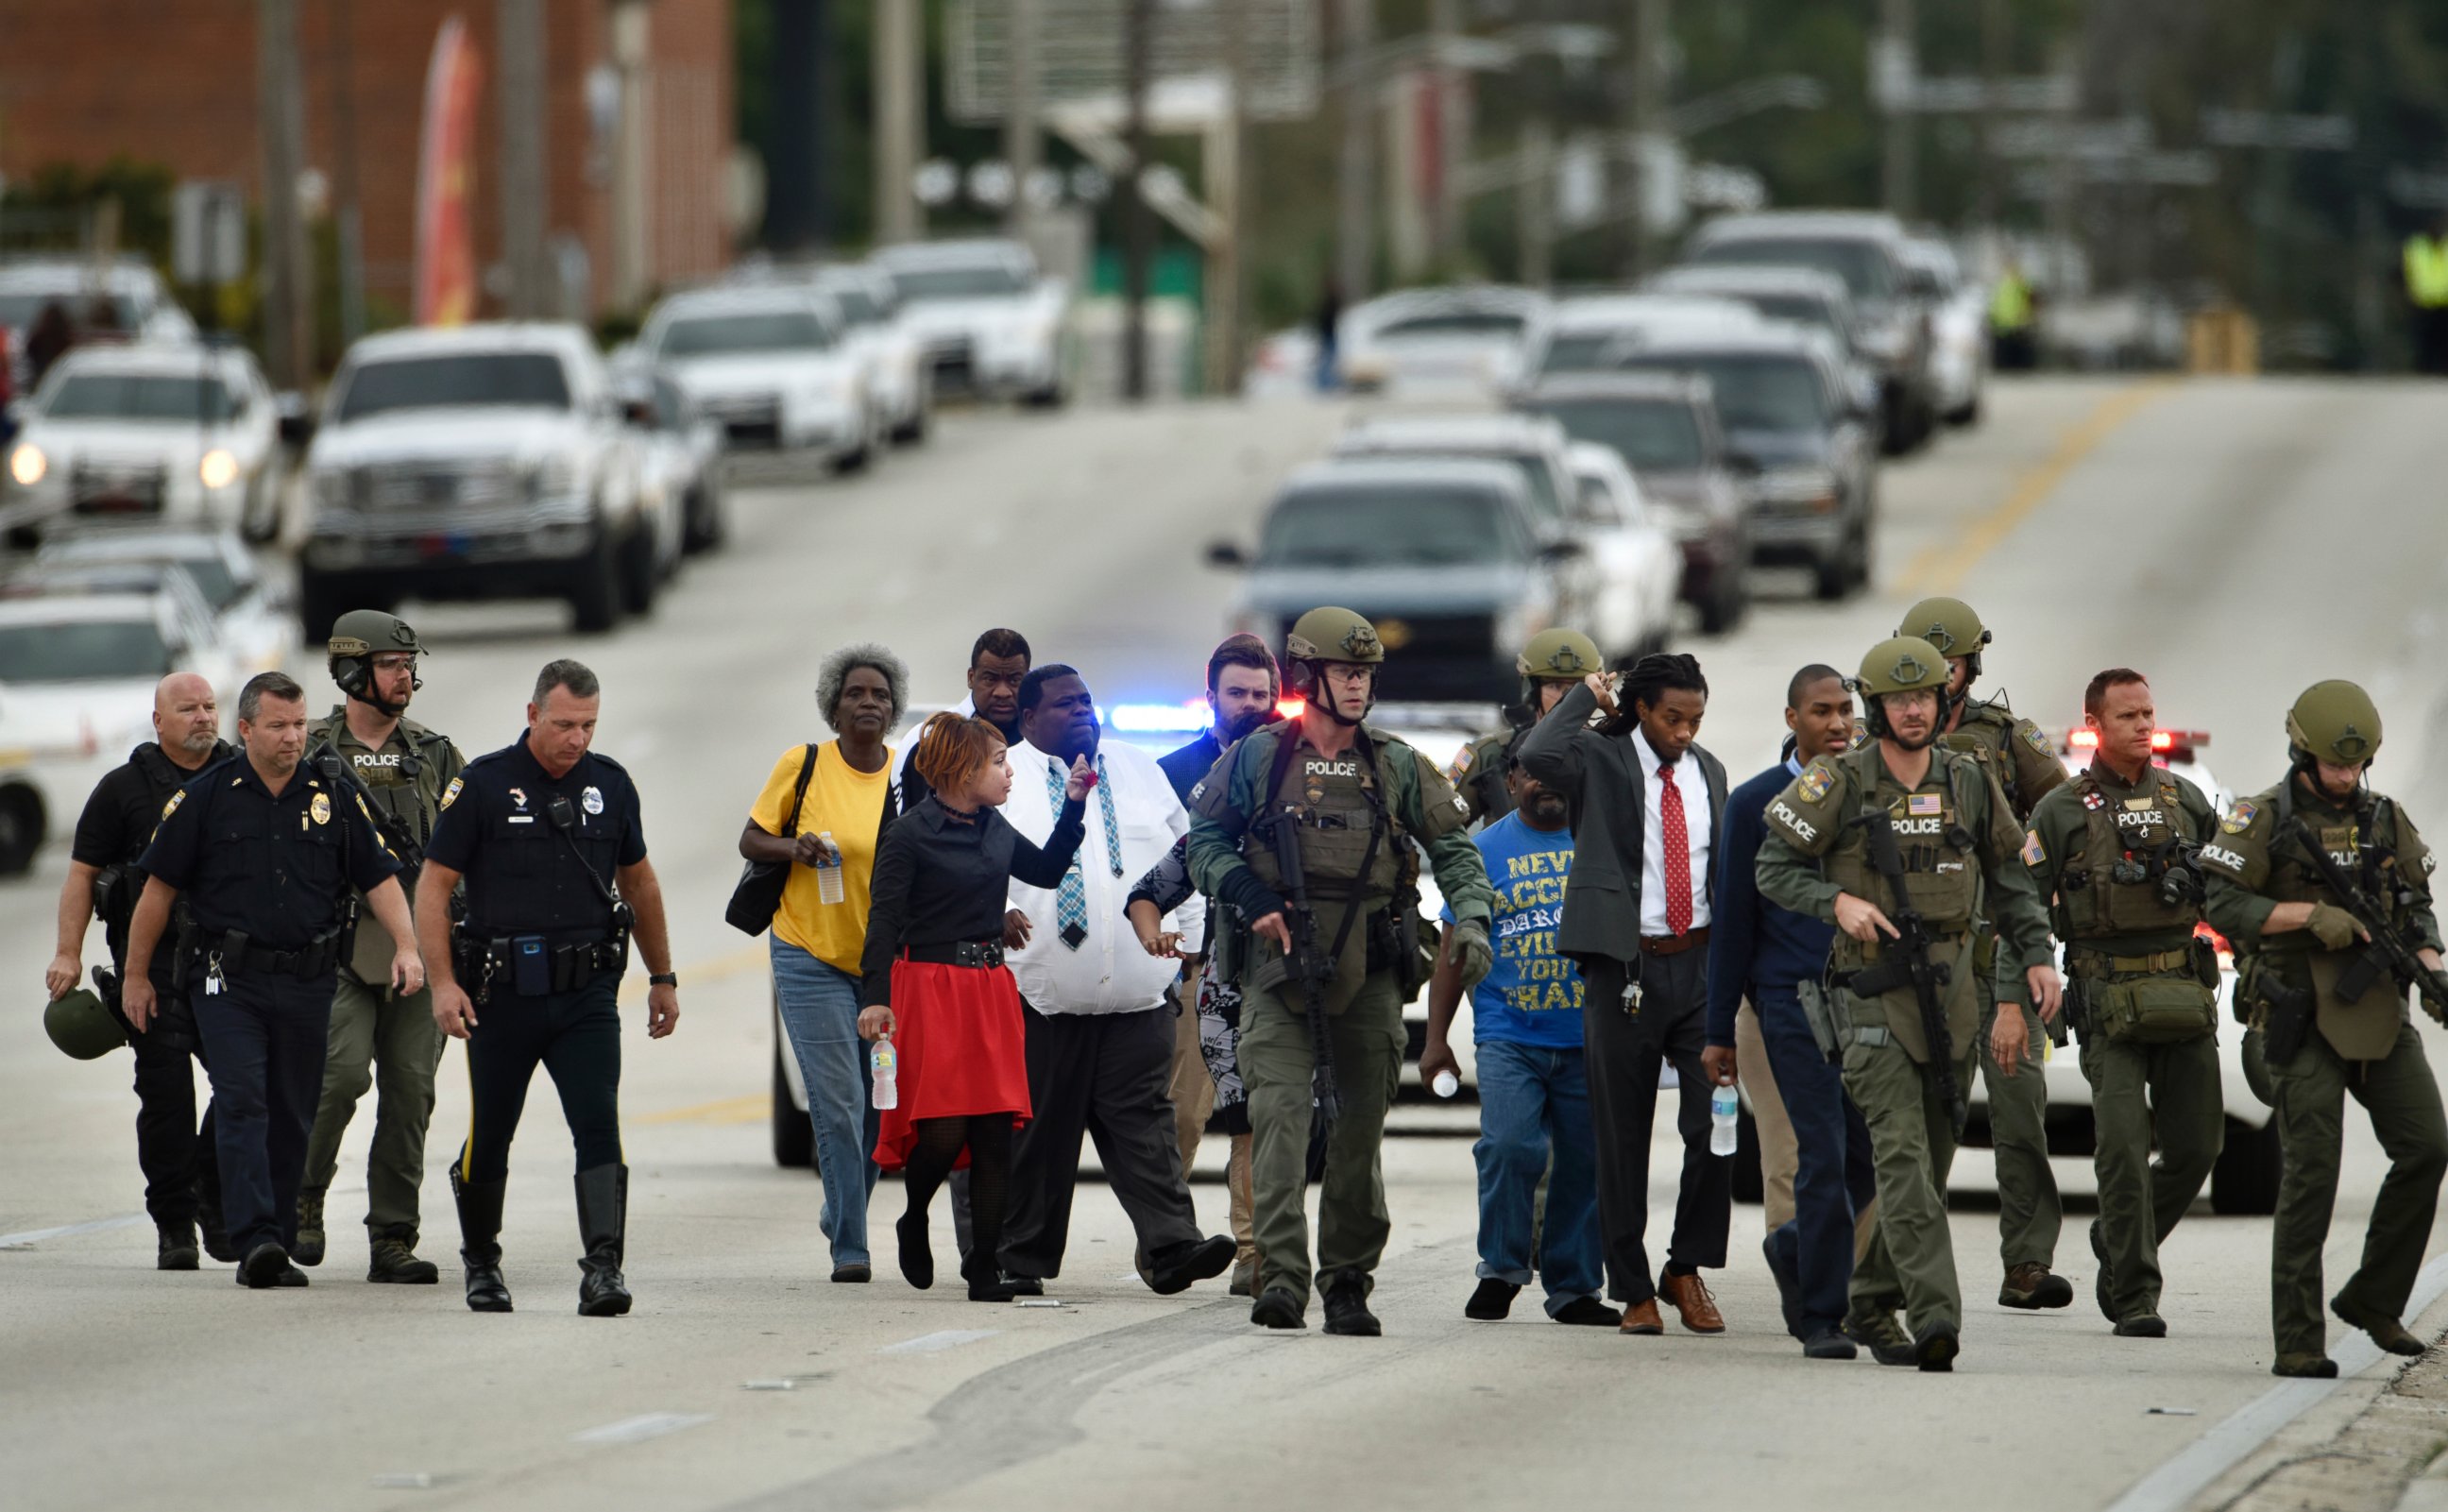 PHOTO: Police officers escort hostages safely across the street after a gunman held them during an attempted robbery at Community First Credit Union, Dec. 1, 2016, in Jacksonville, Florida.